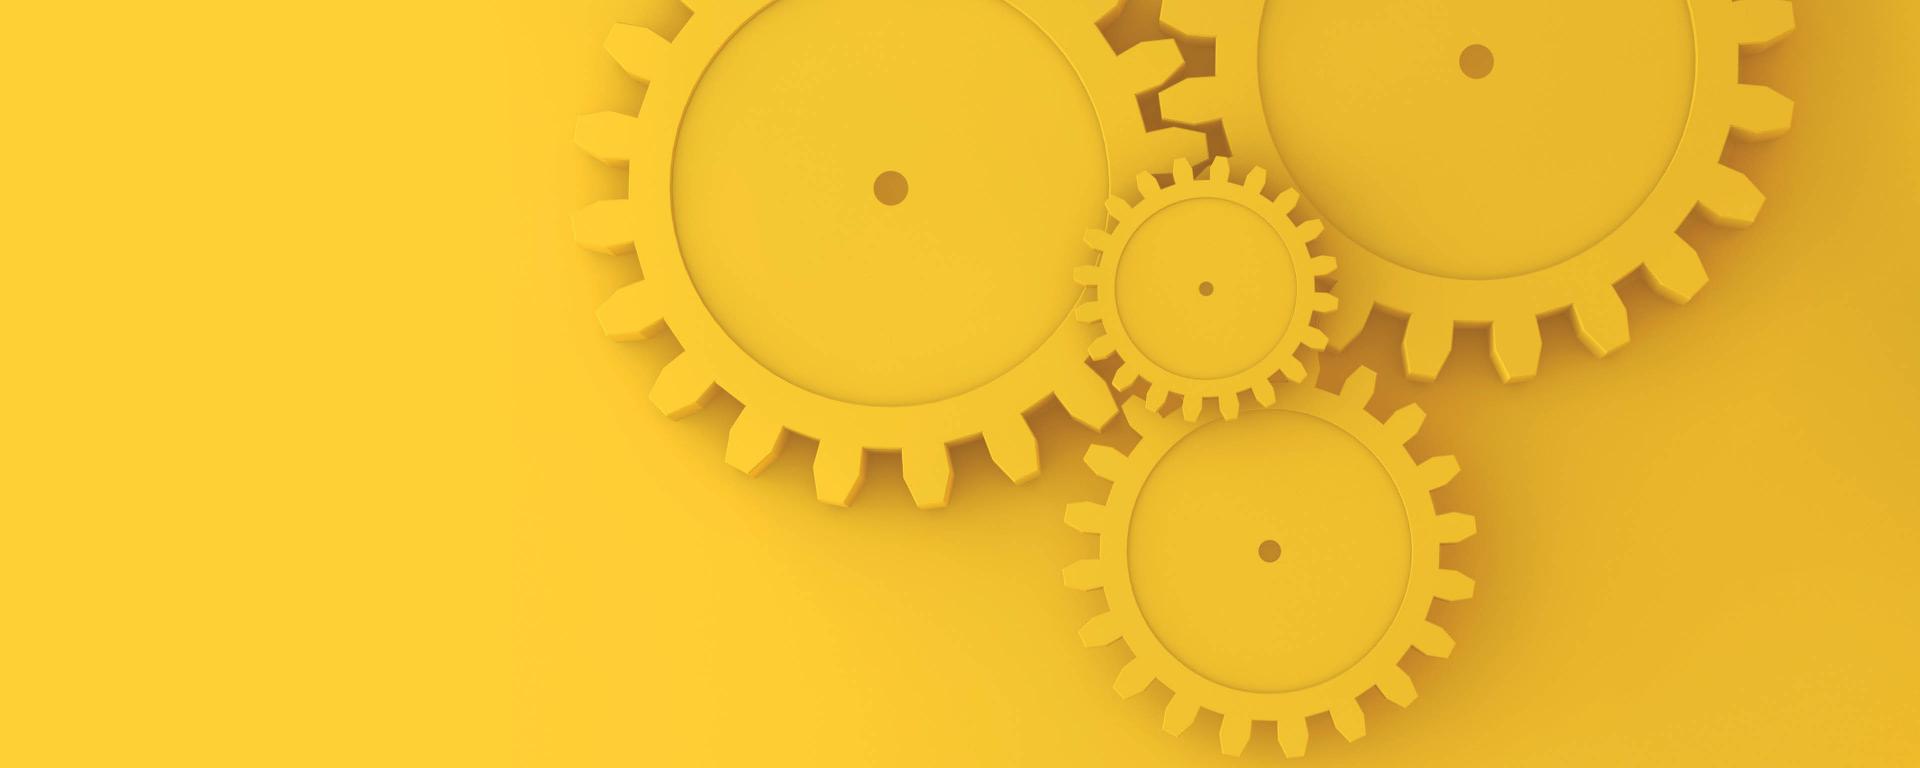 wheels in different sizes in a yellow color on a yellow background